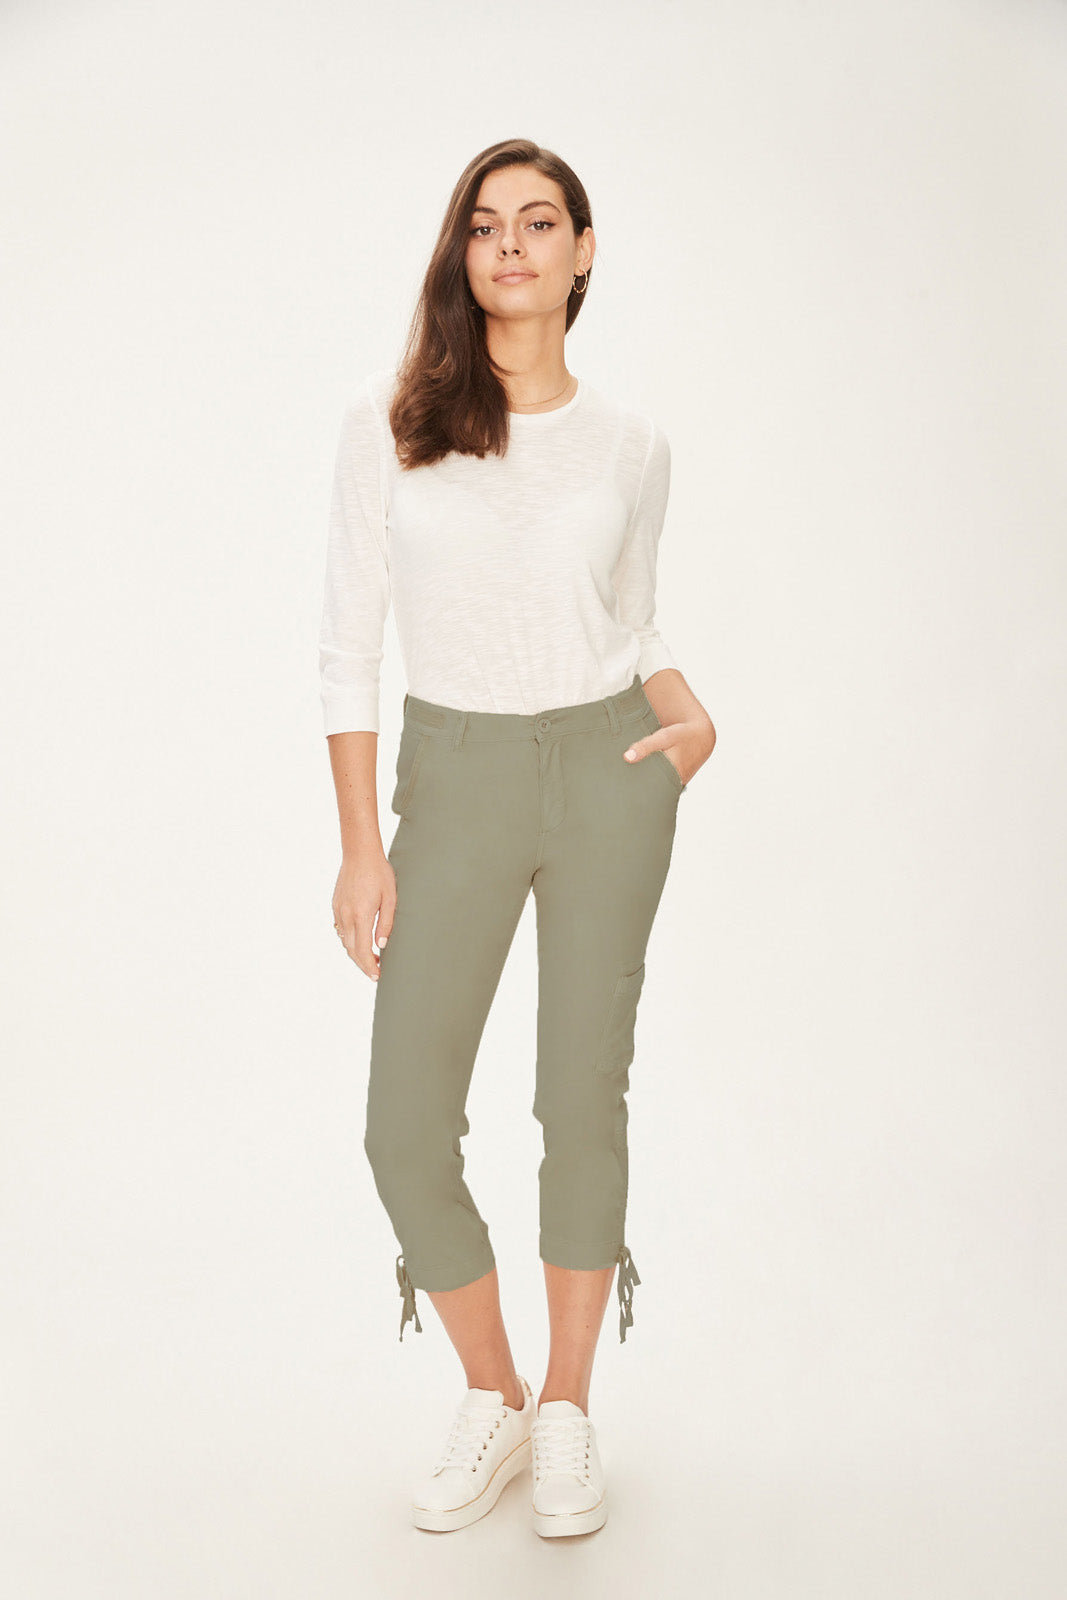 FDJ Lilypad Green Olivia Straight Ruched Cargo Crop Pants